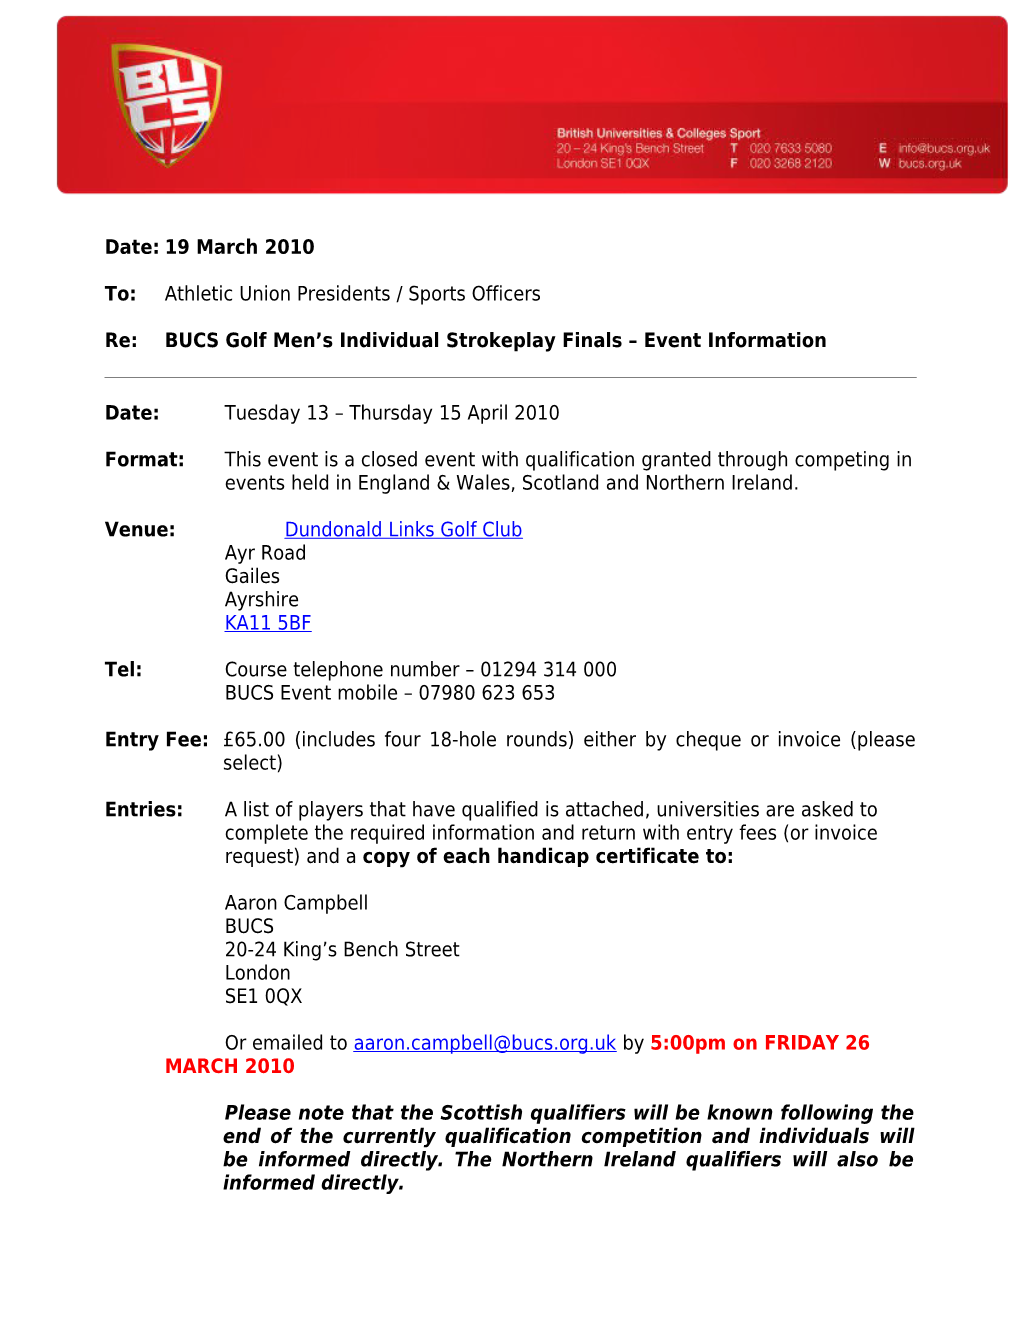 Re:BUCS Golf Men S Individual Strokeplay Finals Event Information